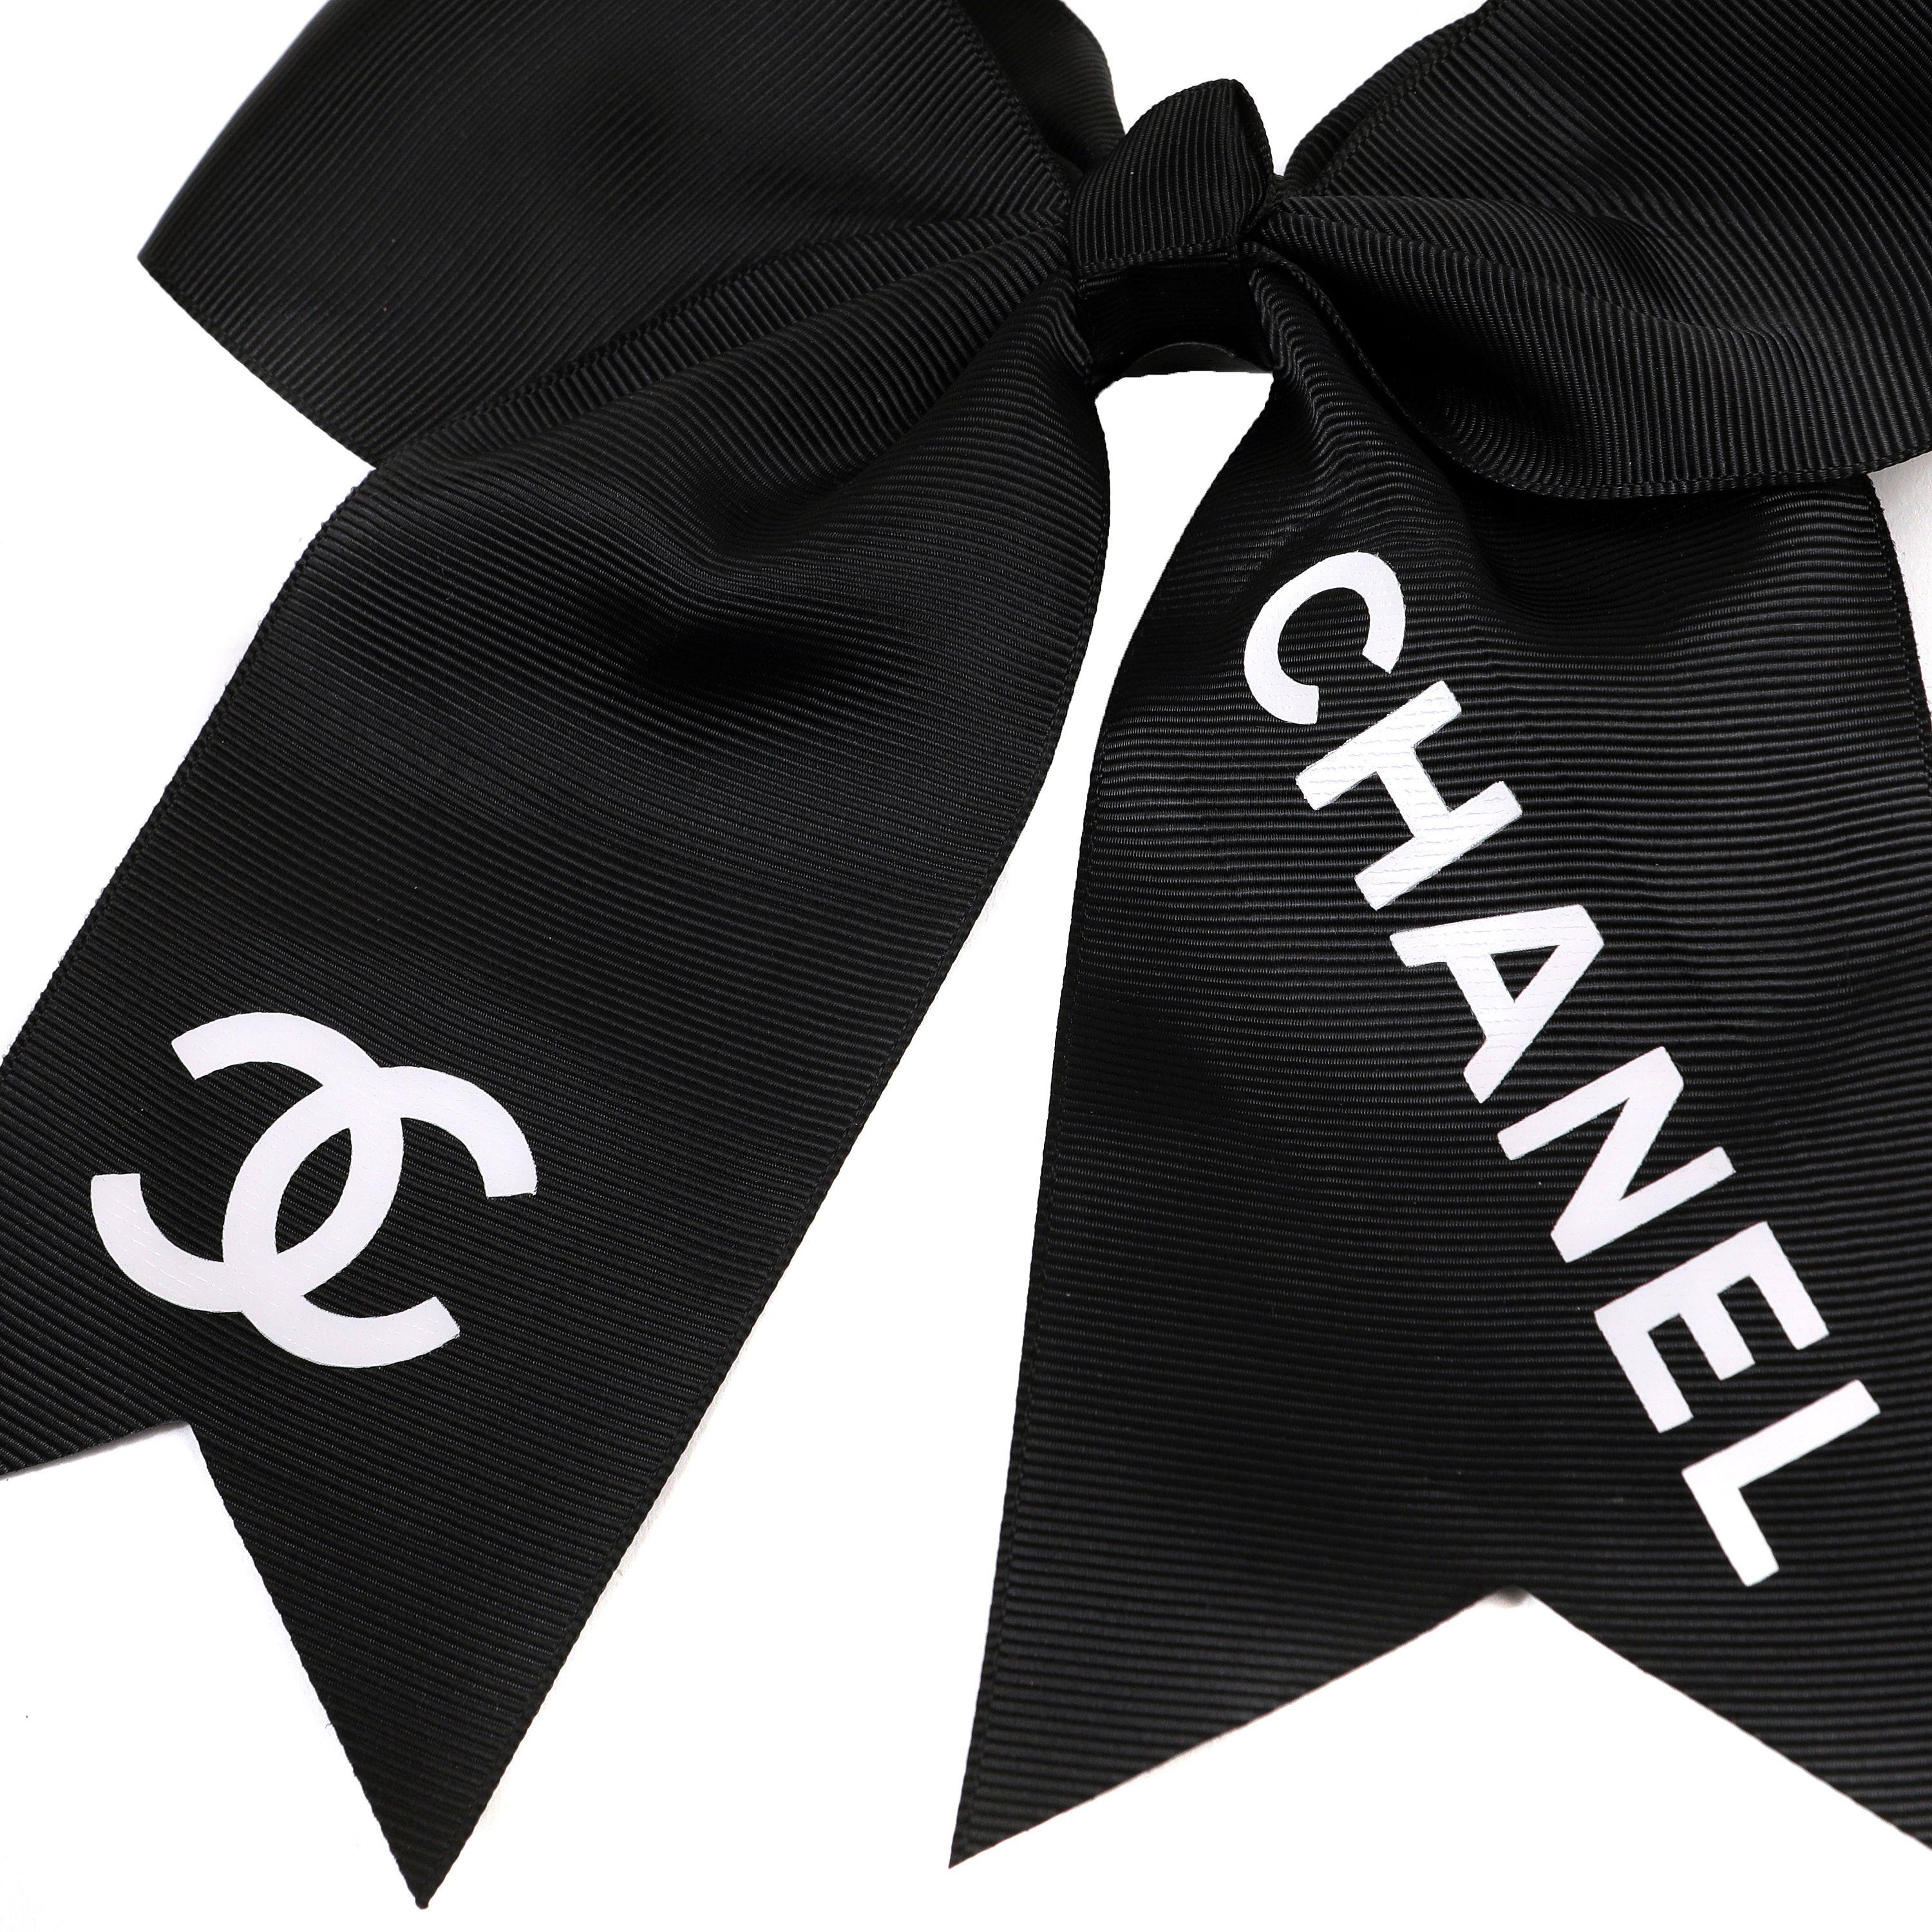 This authentic. Chanel Black Cheer Bow Hair Tie is pristine.  Oversized black grosgrain bow with white CC and CHANEL lettering.  Elastic tie attached.  
PBF 13940
